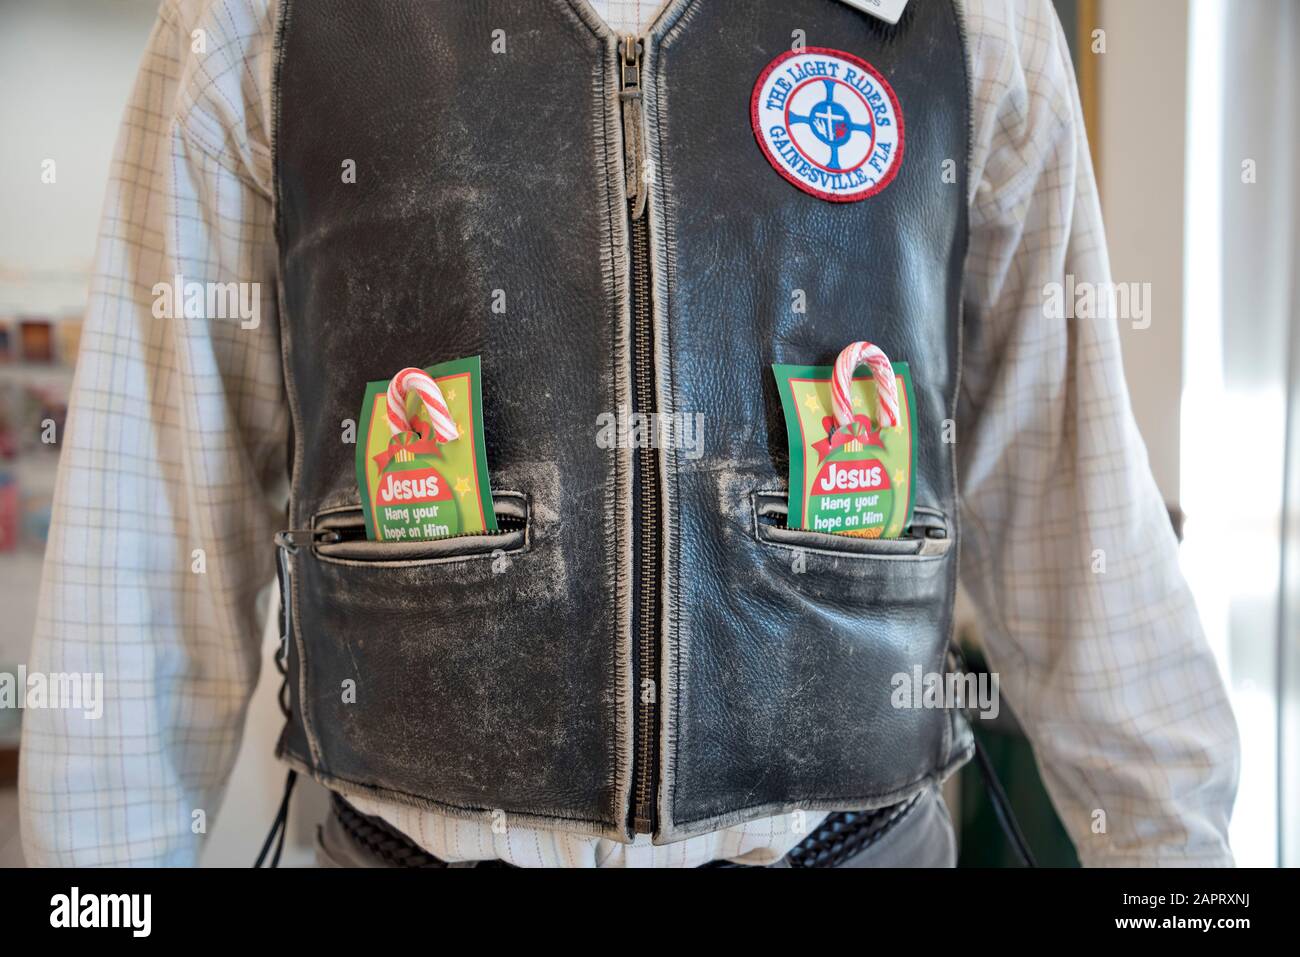 Jesus motorcycle vest worn by a church greeter. Stock Photo